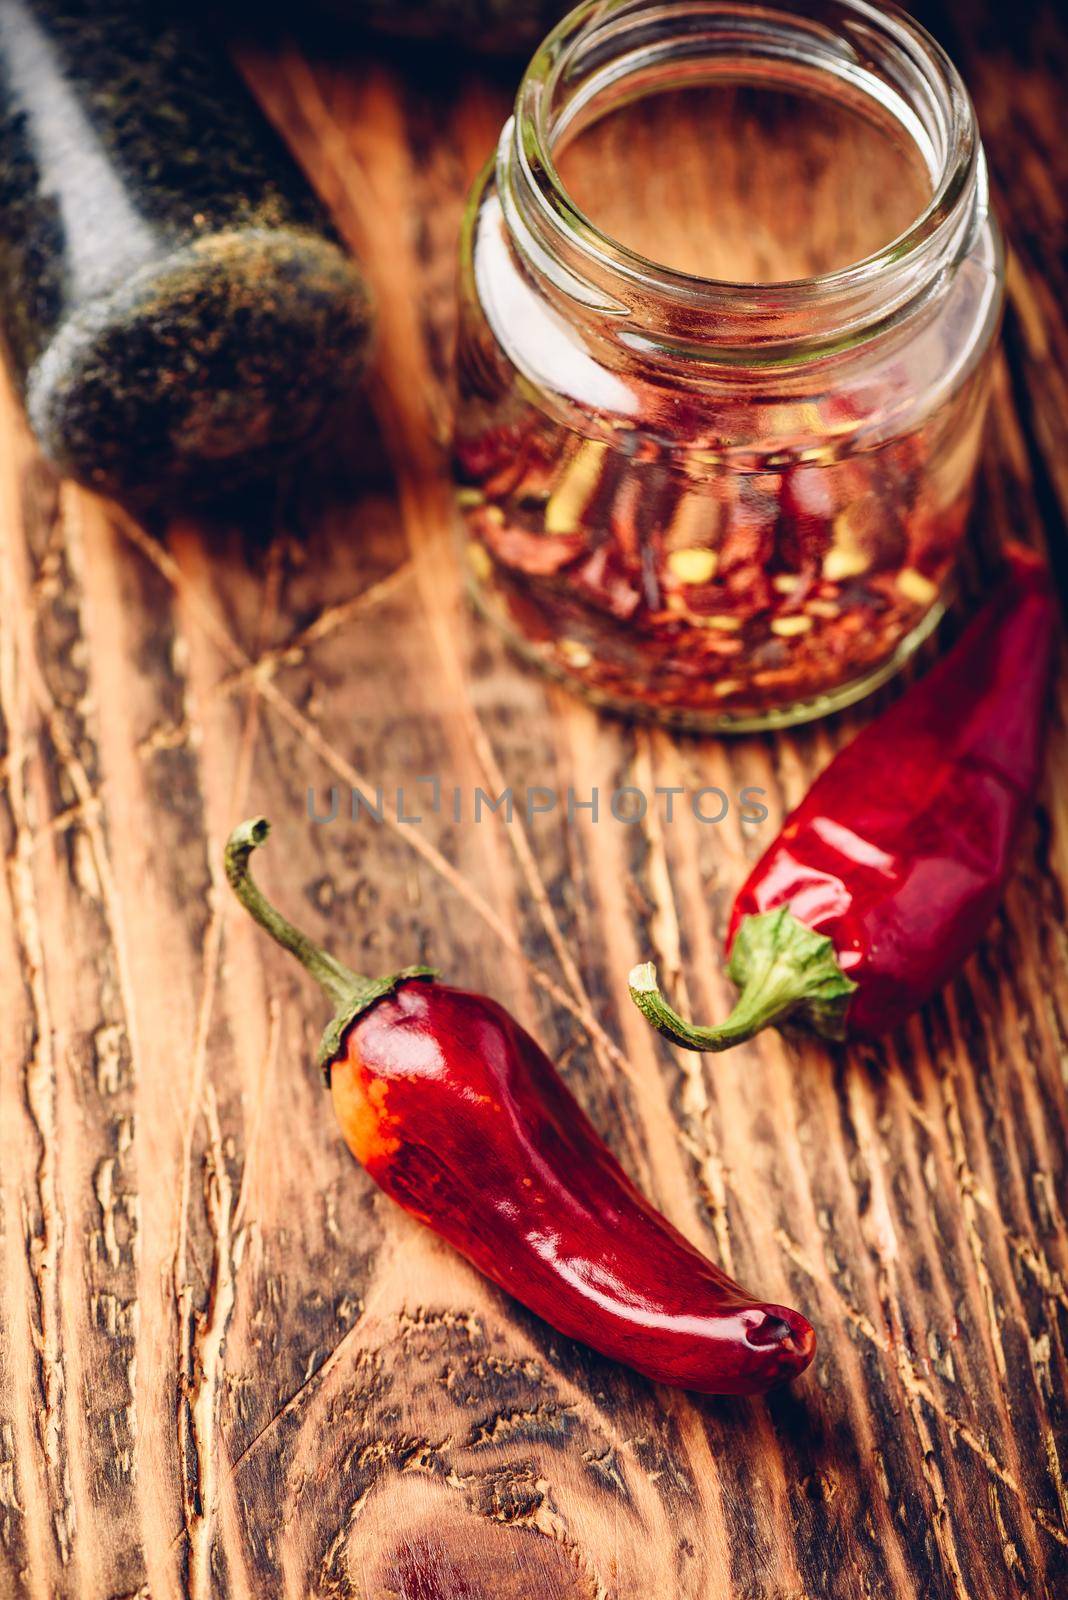 Sun dried red chili peppers on wooden surface